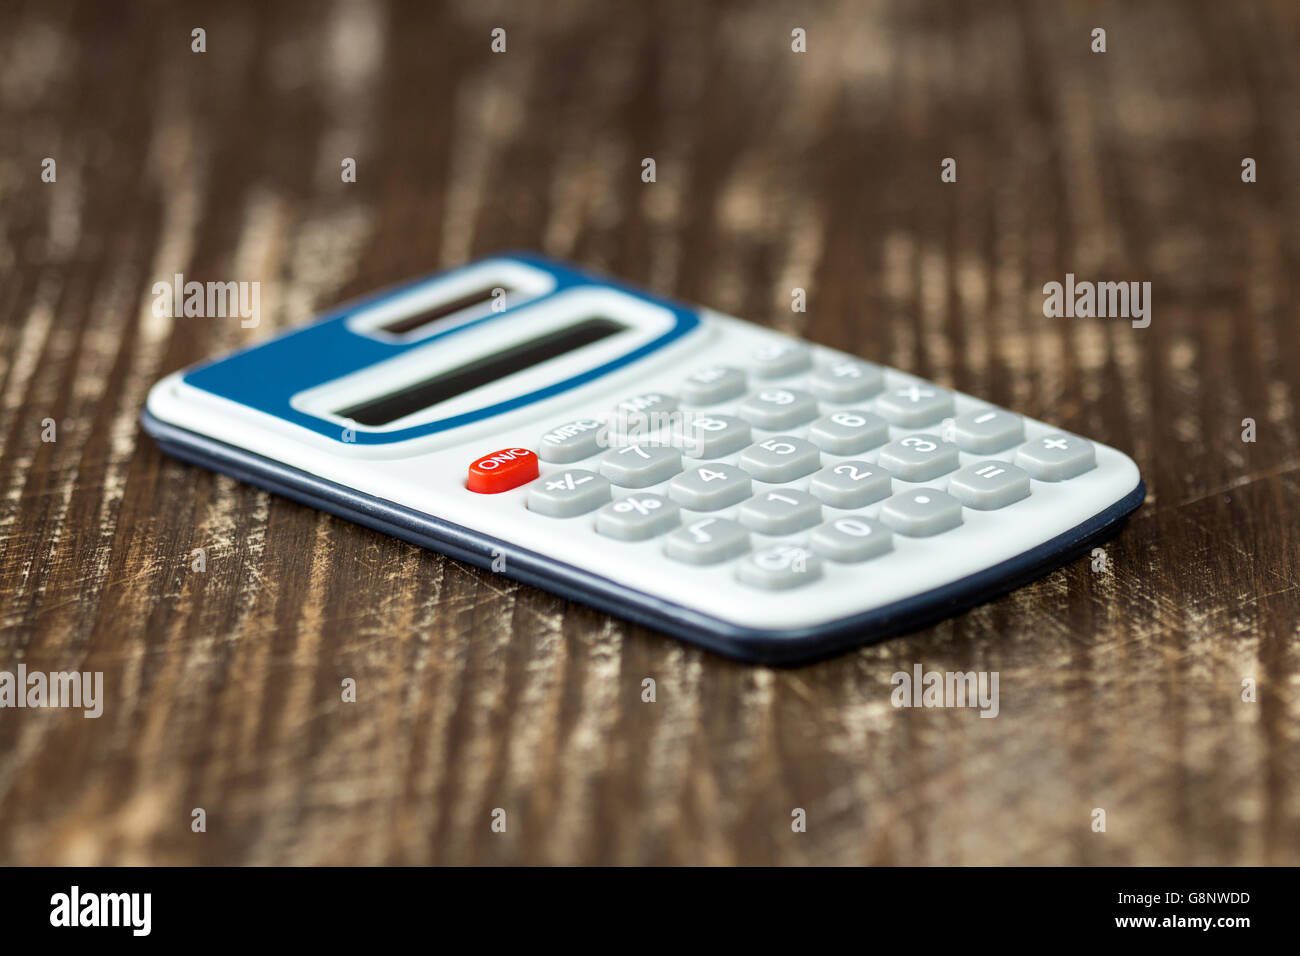 Electronic calculator on wooden background. Selective focus. Stock Photo